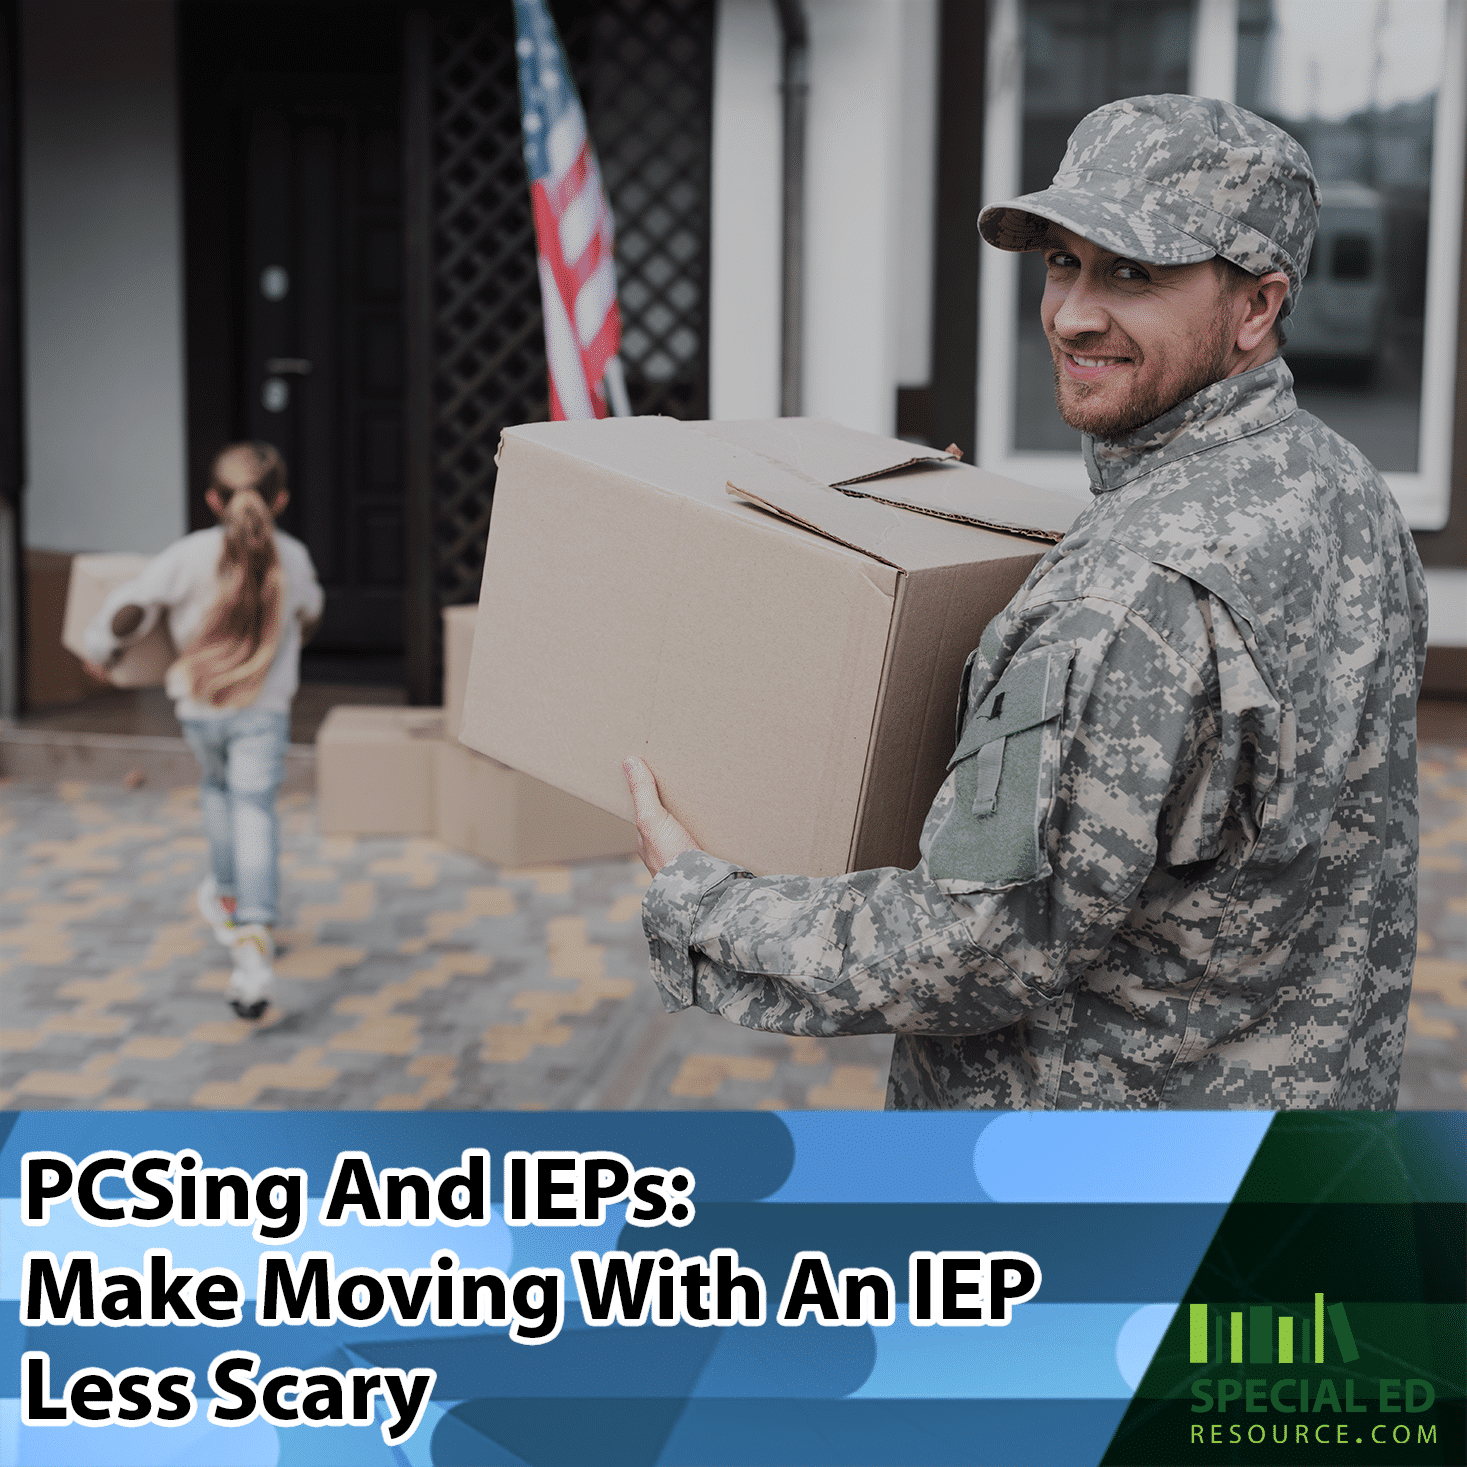 Military family preparing to relocate with a child in special education services hoping to make moving with an IEP less stressful.